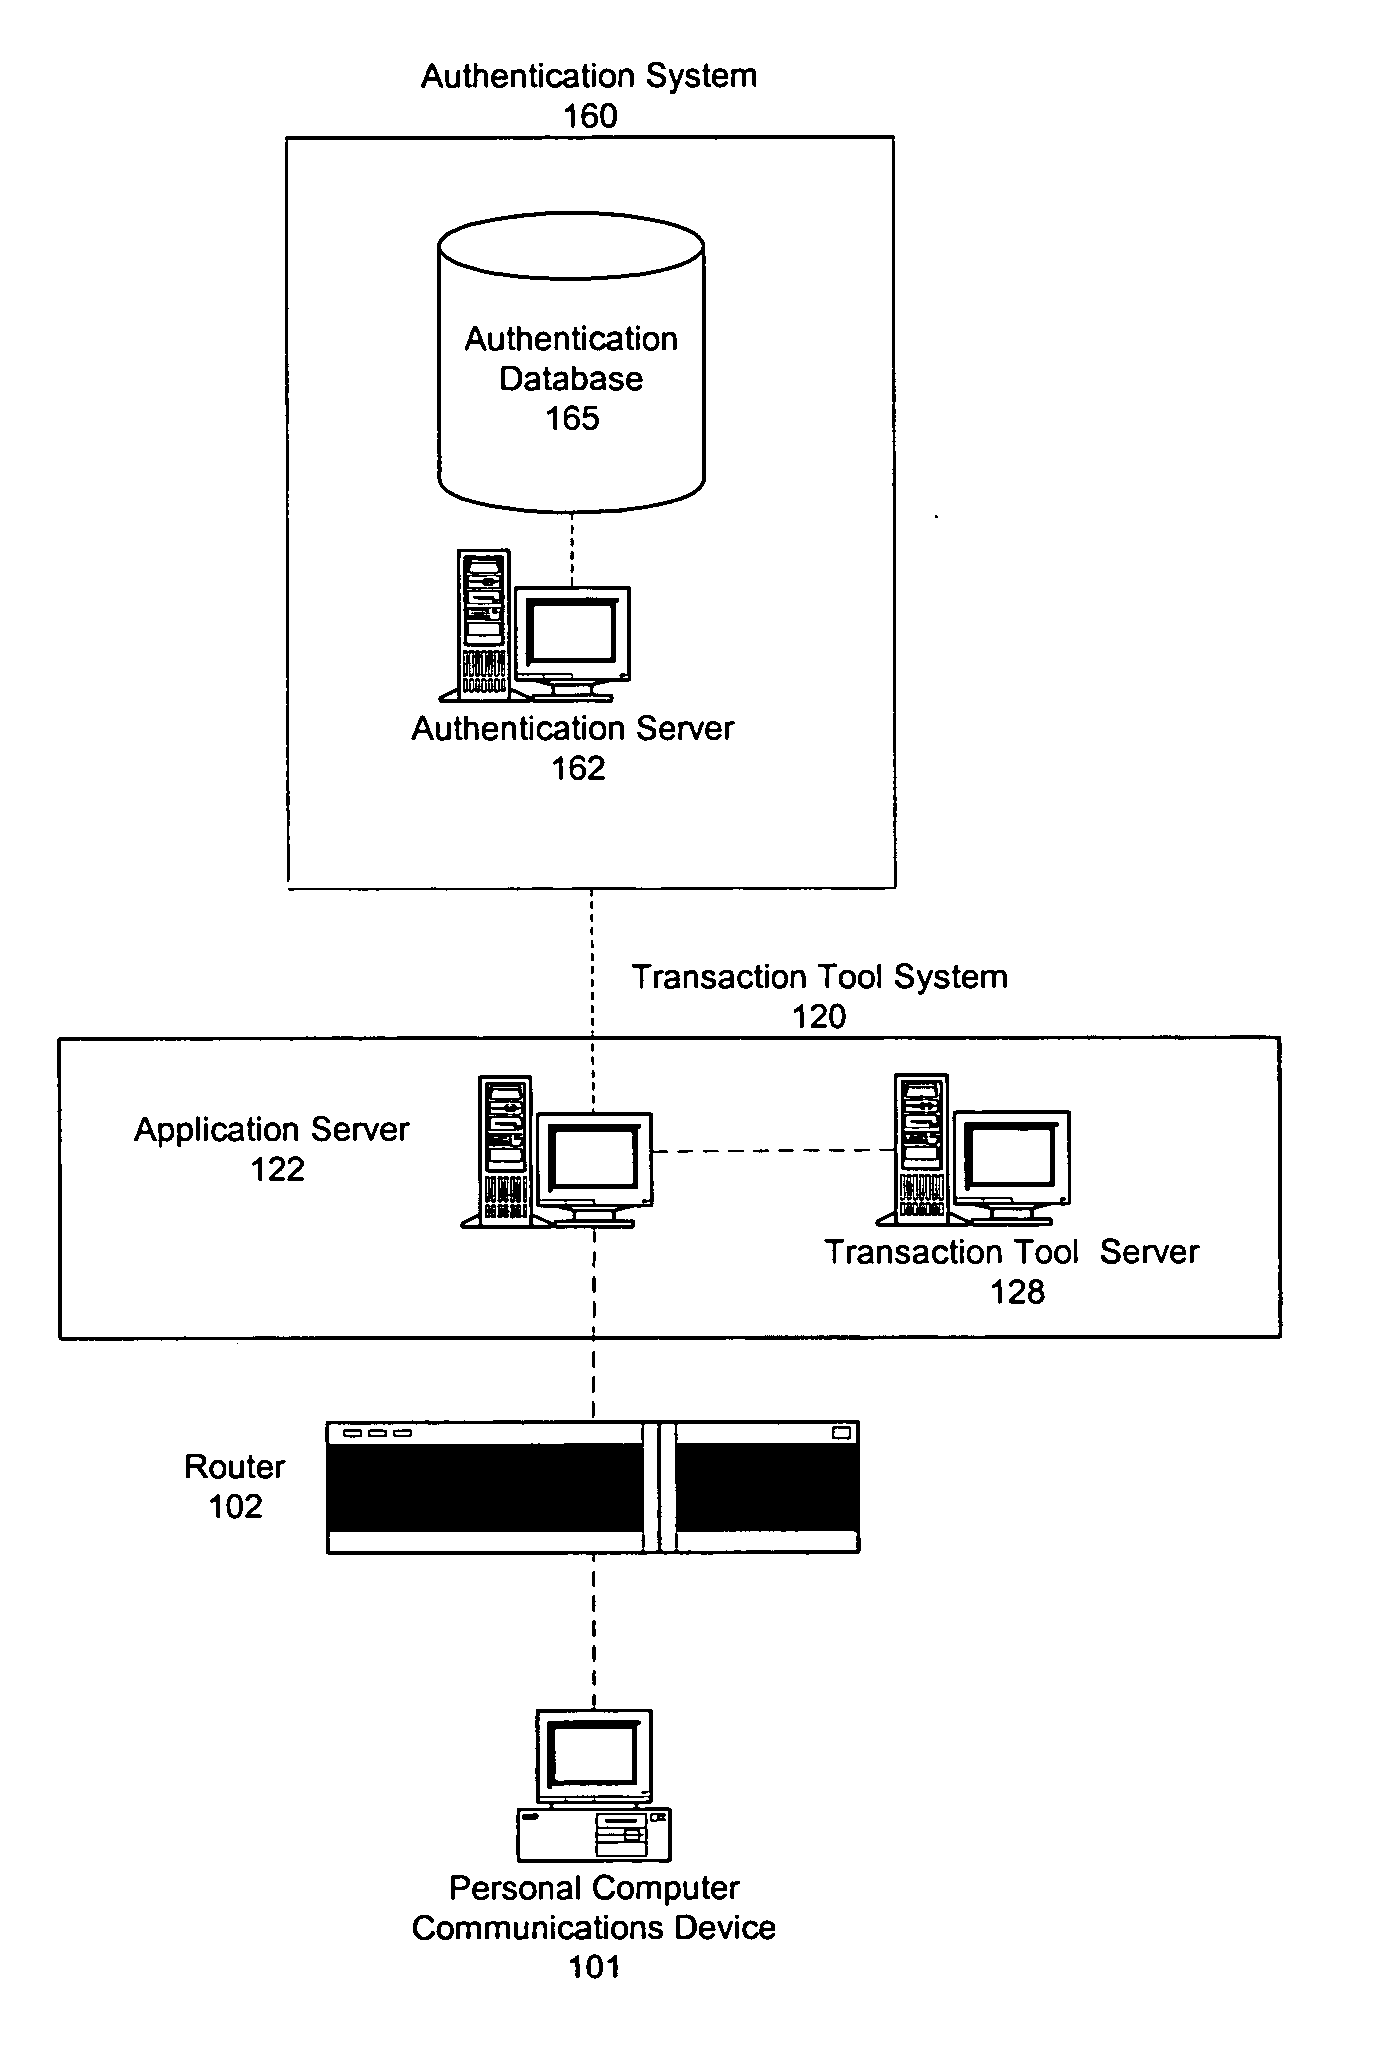 Pluggable authentication for transaction tool management services